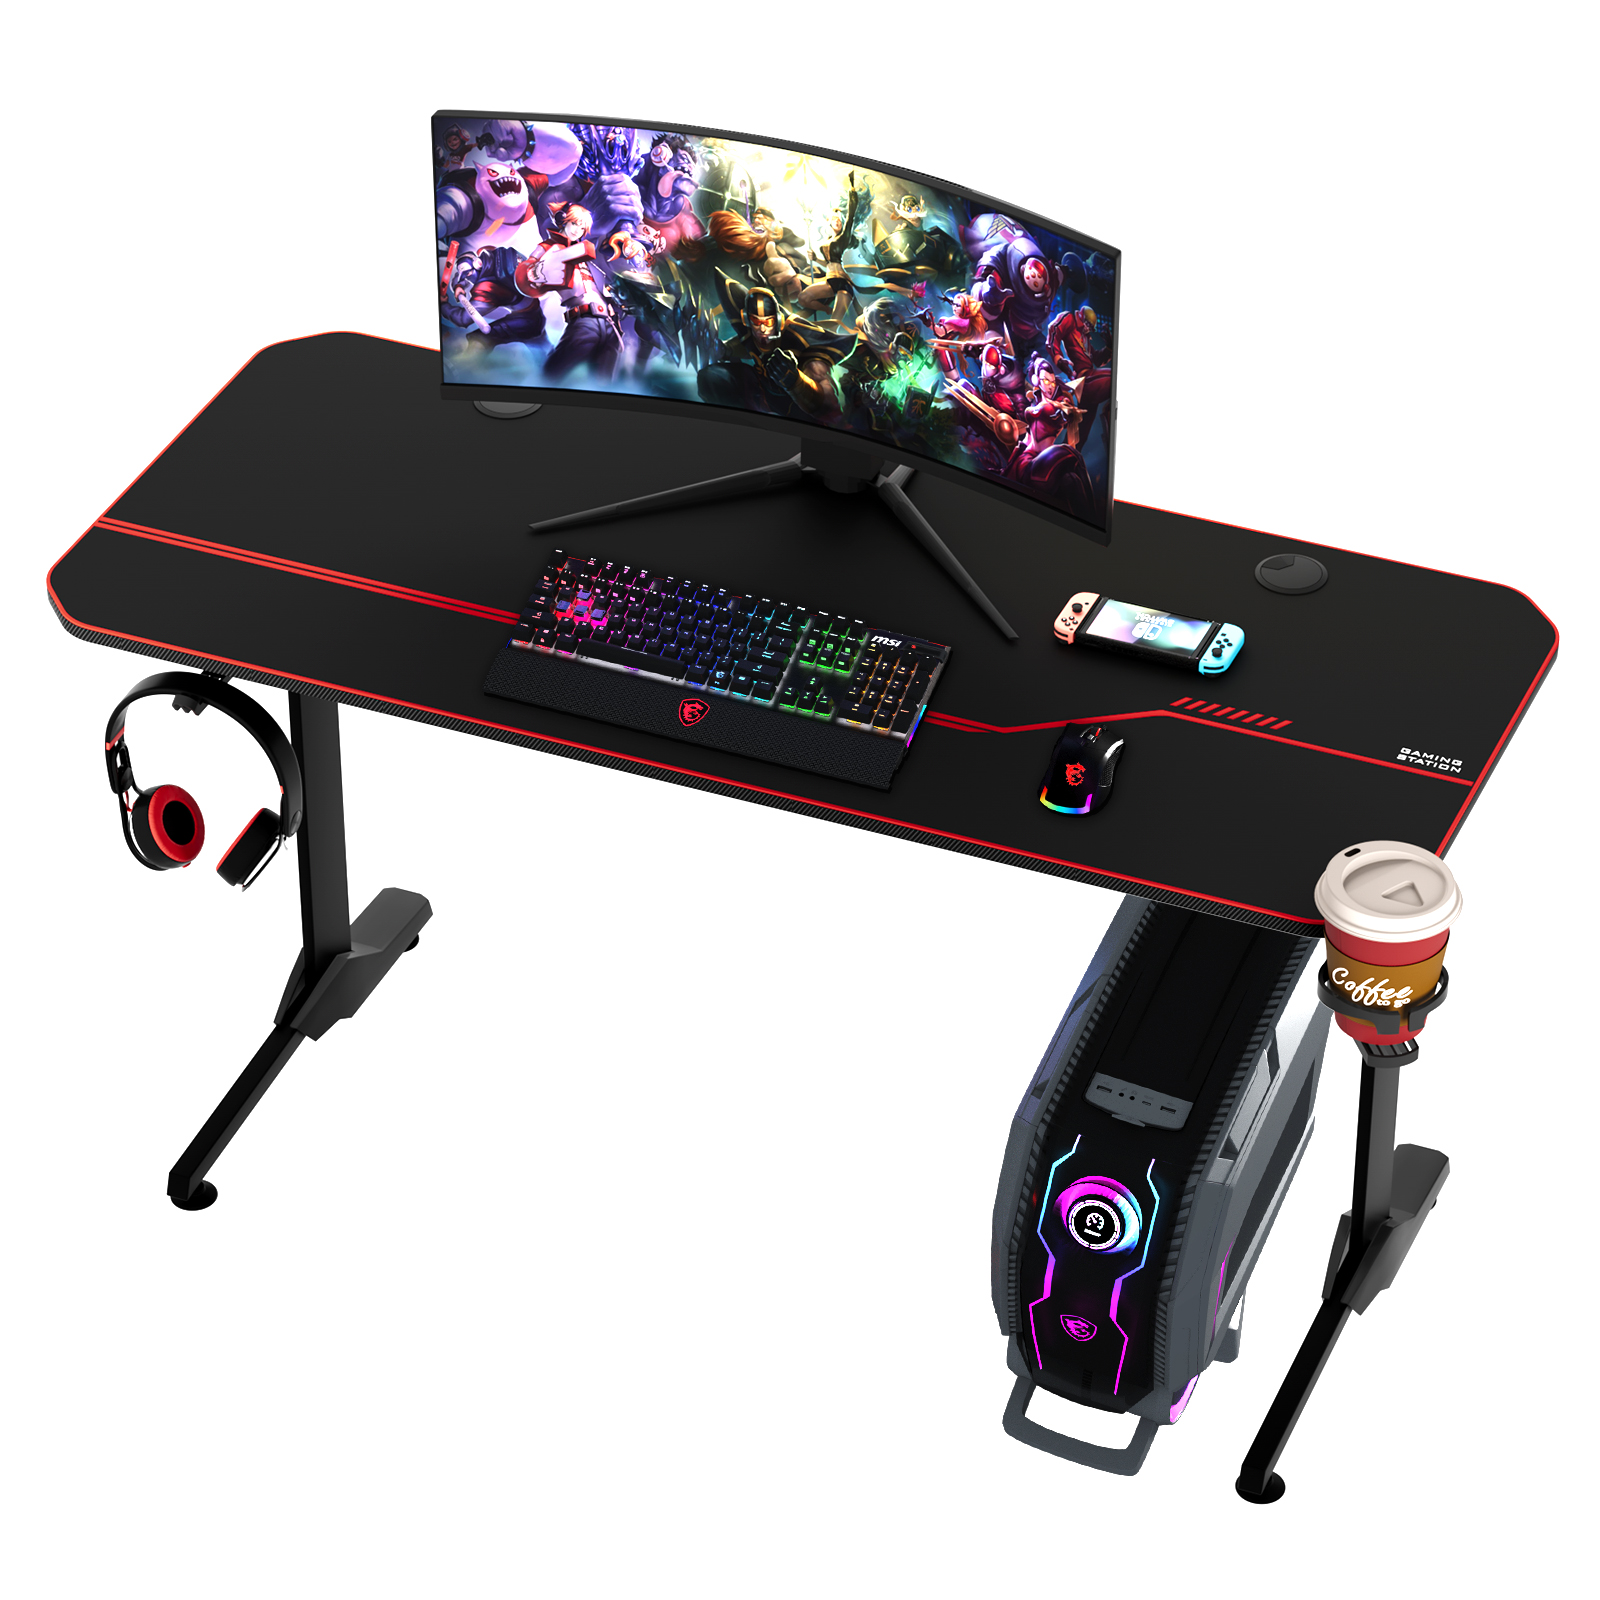 Arlopu 55in Racing Style Gaming Desk, T-Shaped Gaming Computer Table Home Office Workstation with Mouse Pad, Cup Holder & Headphone Hook - image 1 of 8